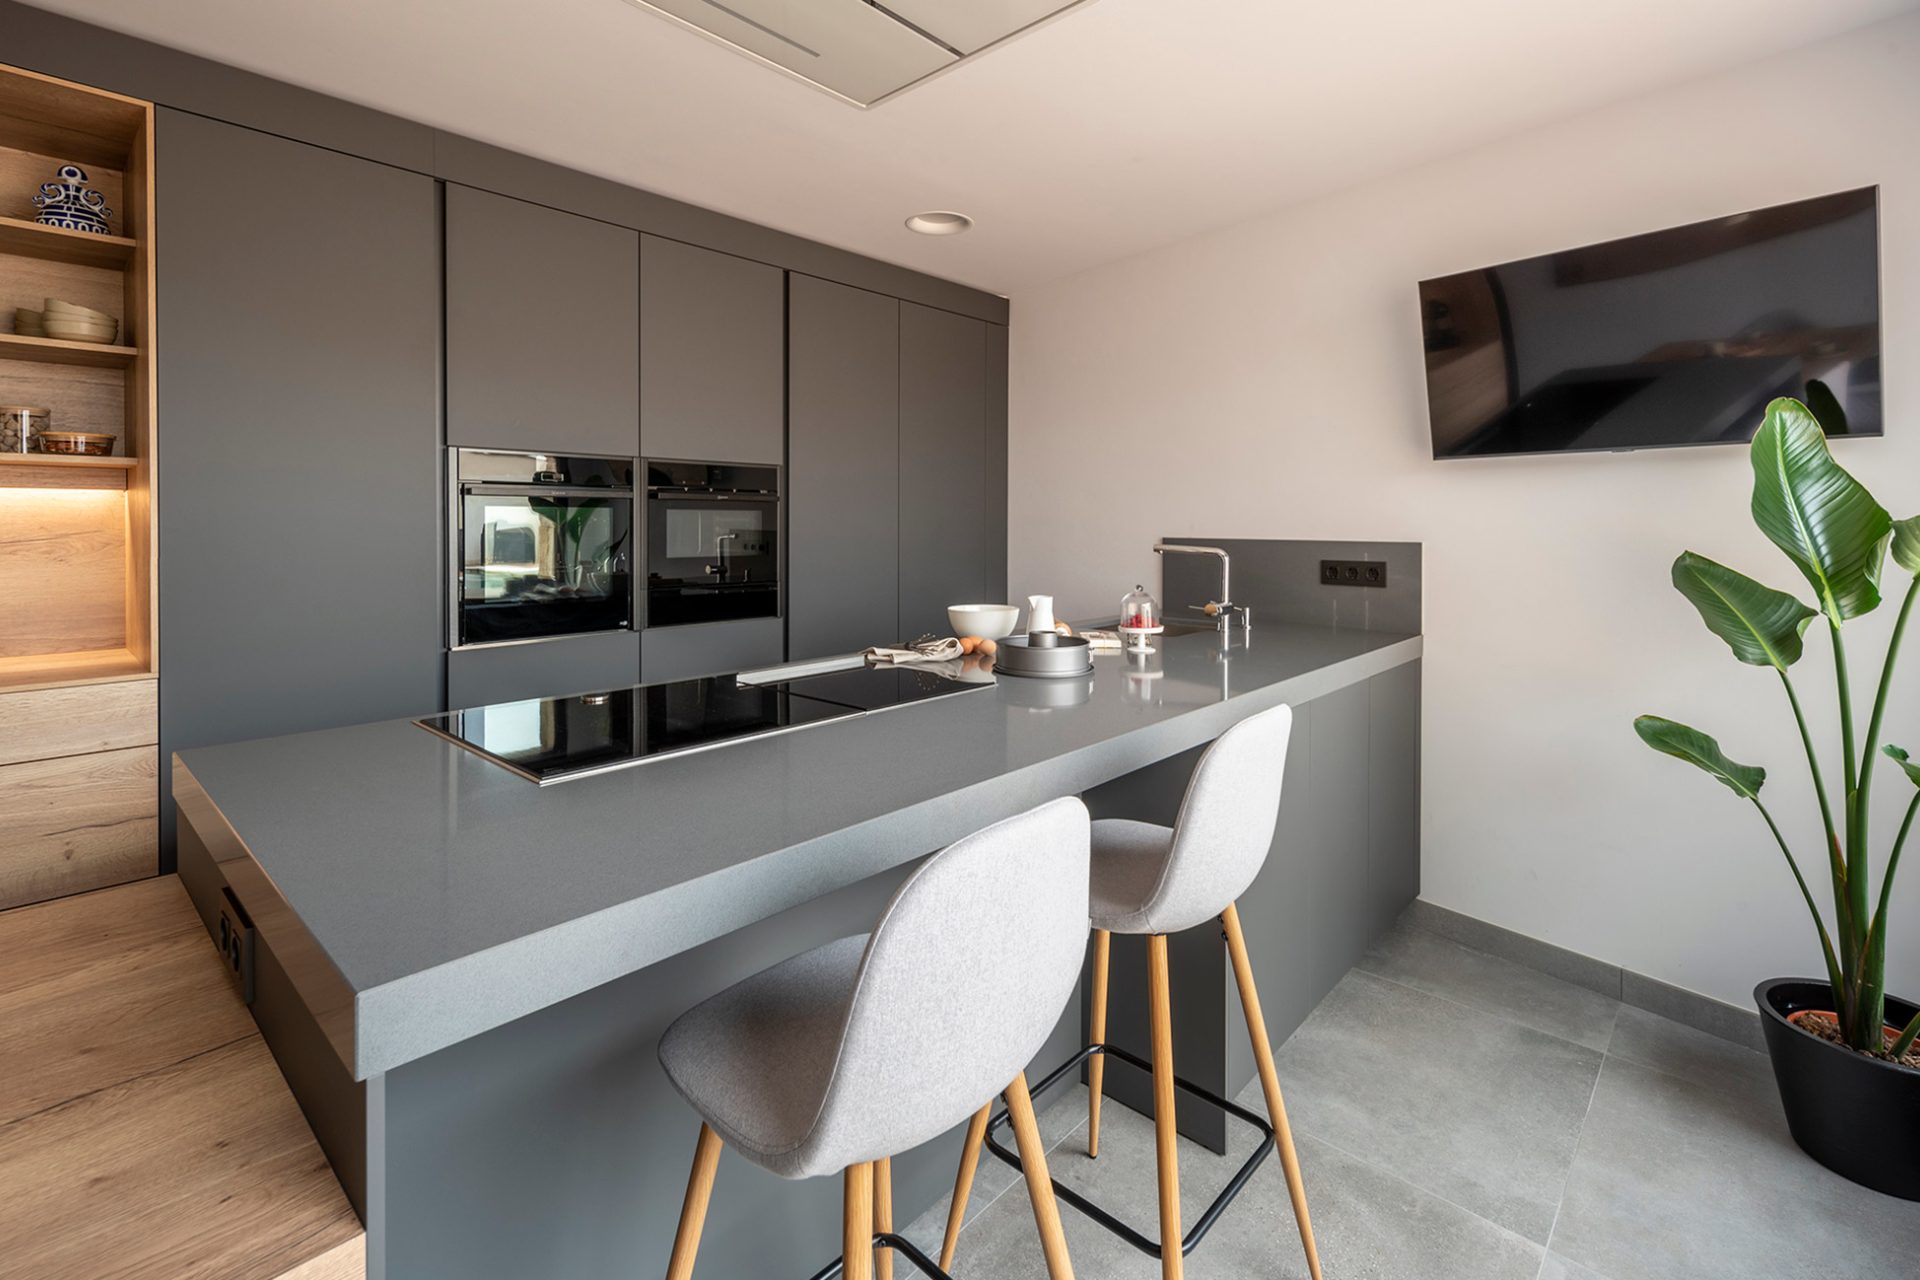 Anthracite, steel grey and wood peninsula kitchen with sink, stove, integrated breakfast bar and table attached.